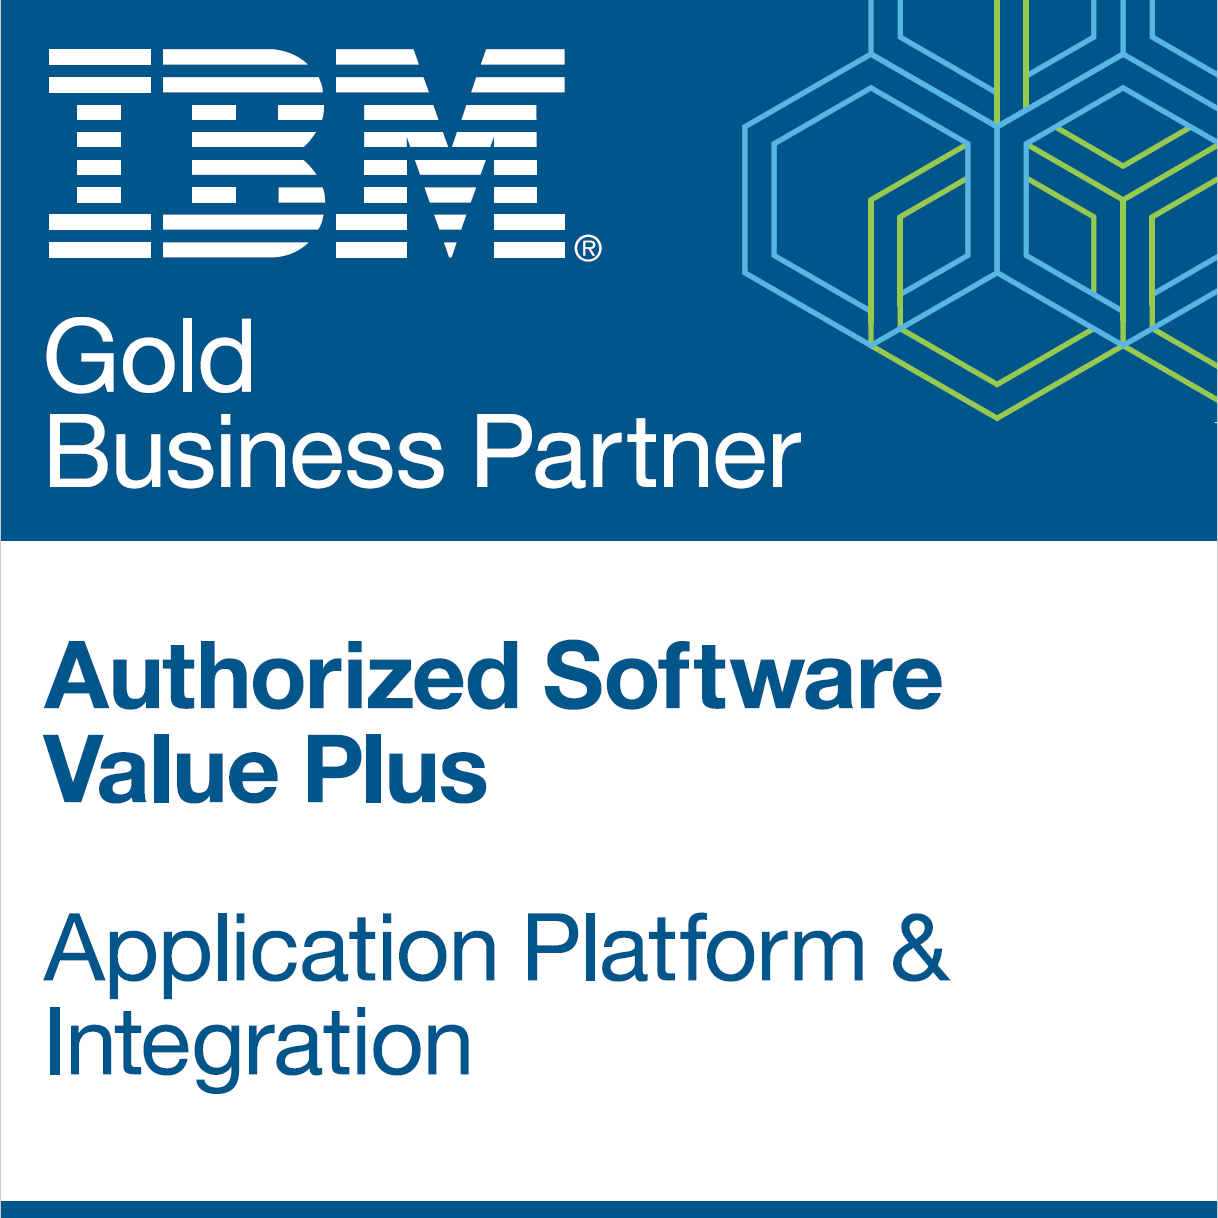 ABS is a Gold IBM Business Partner and Software Reseller...